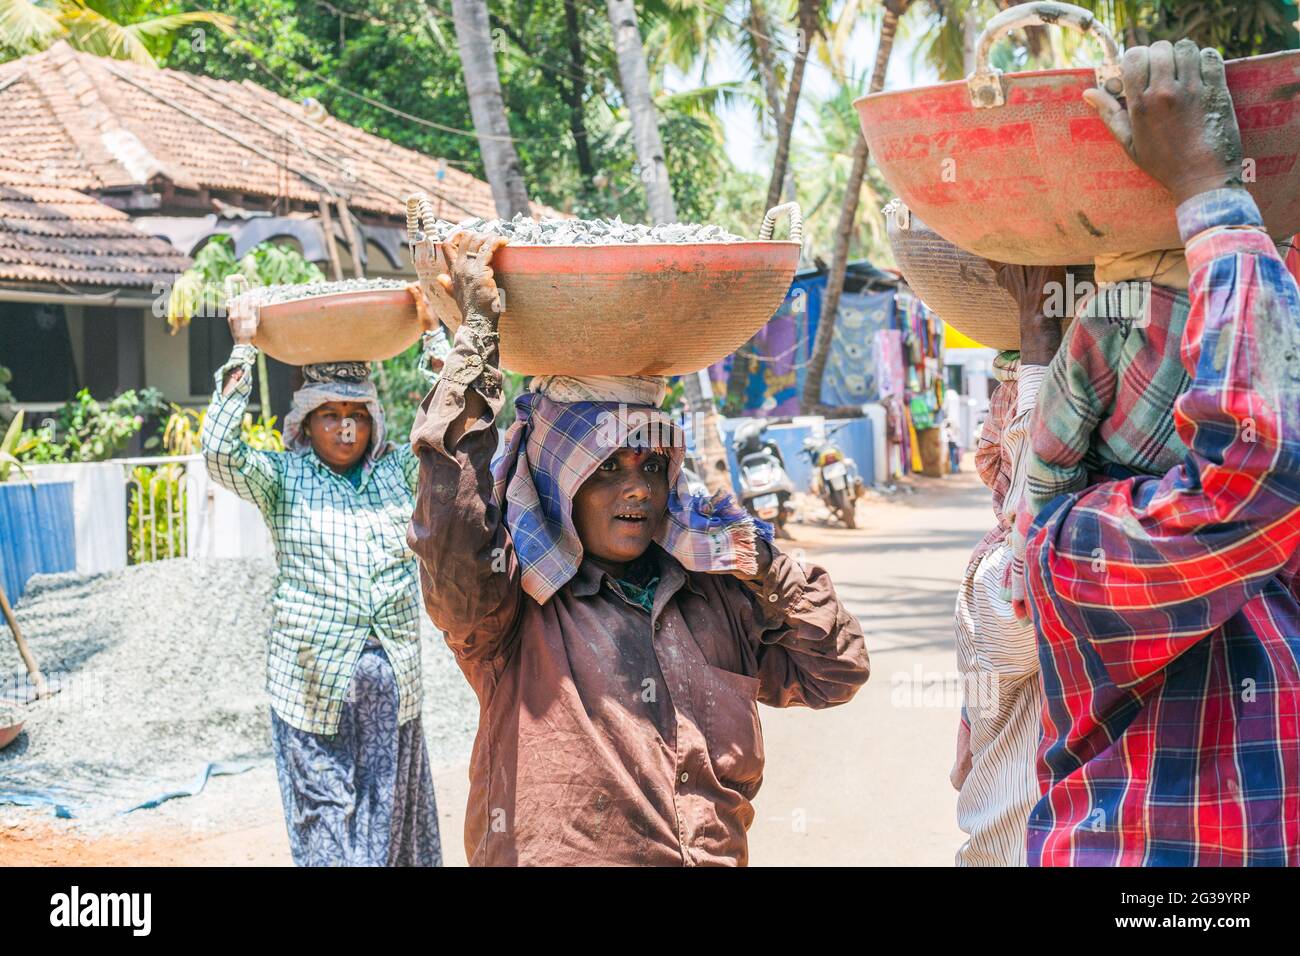 Female Indian manual labour workers carrying heavy loads on their heads at construction site, Agonda, Goa, India Stock Photo